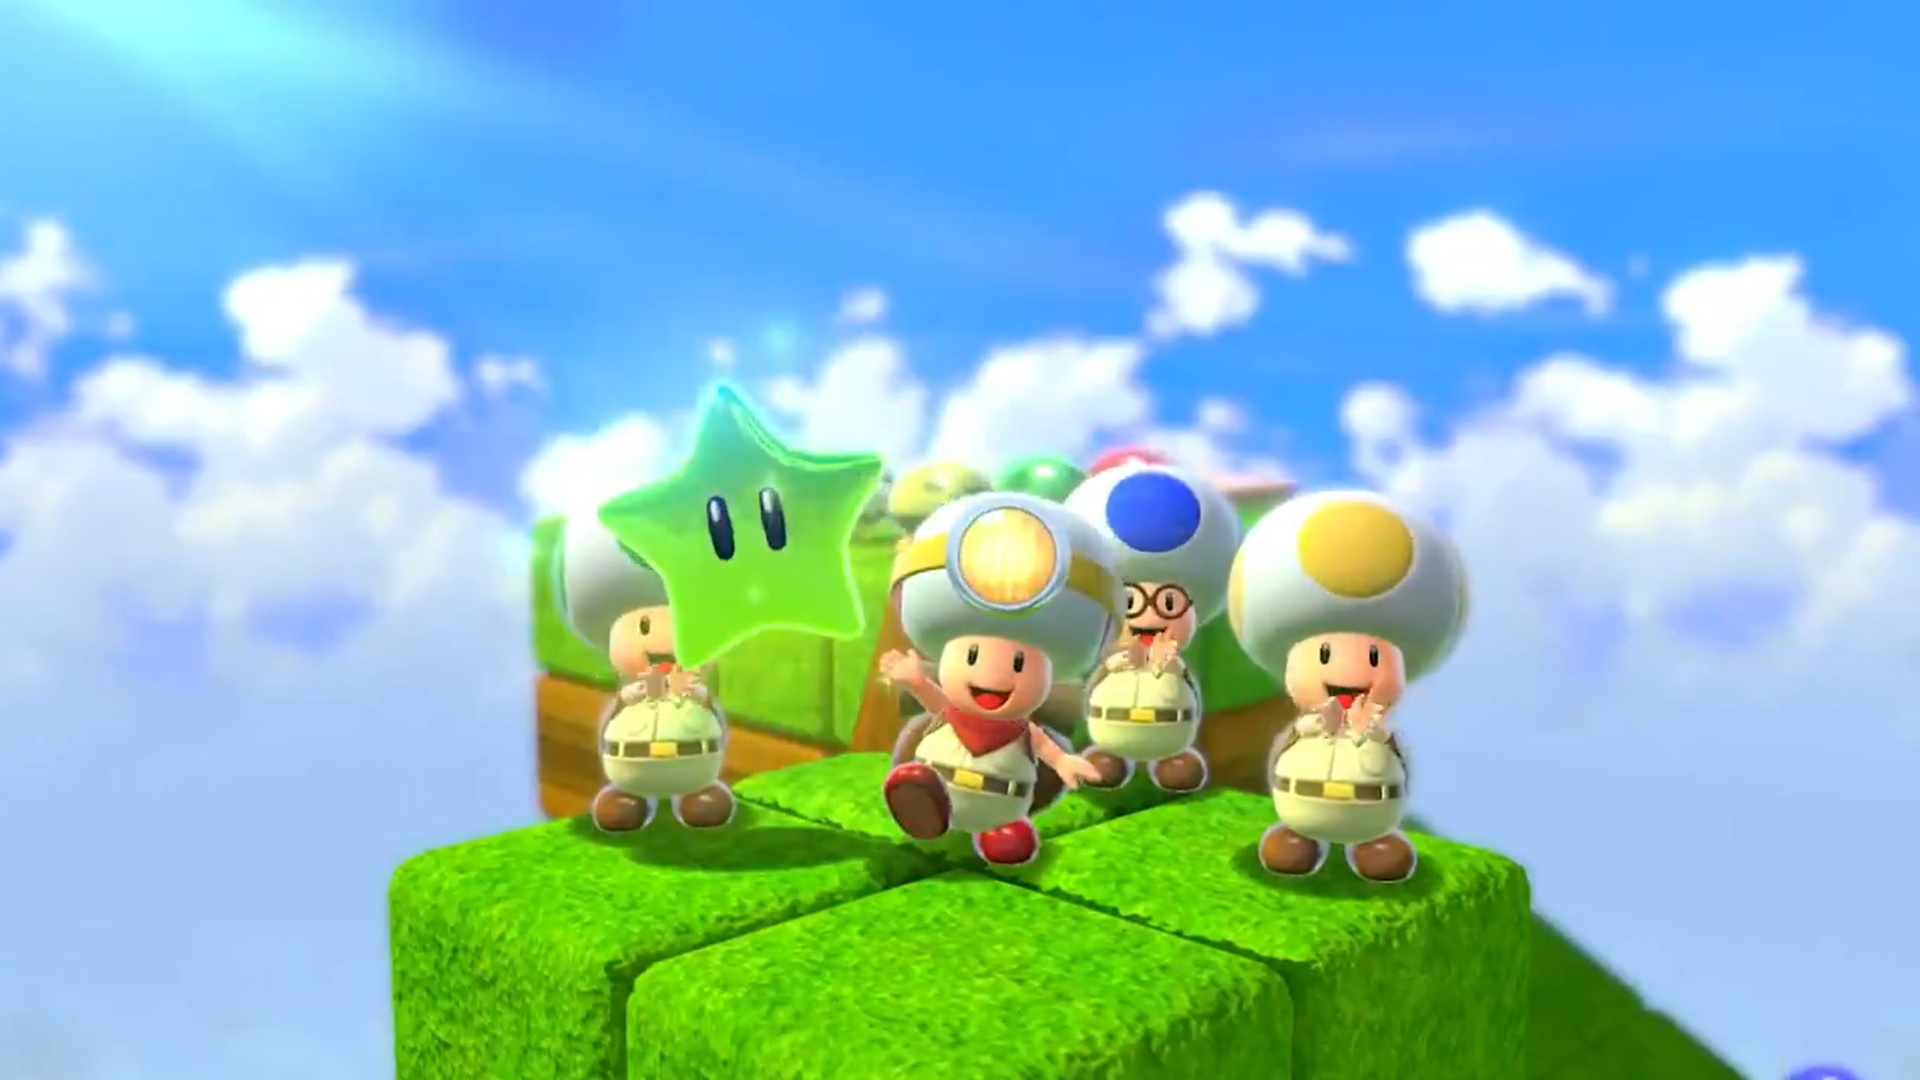 Captain Toad Multiplayer added to Super Mario 3D World + Bowser Fury